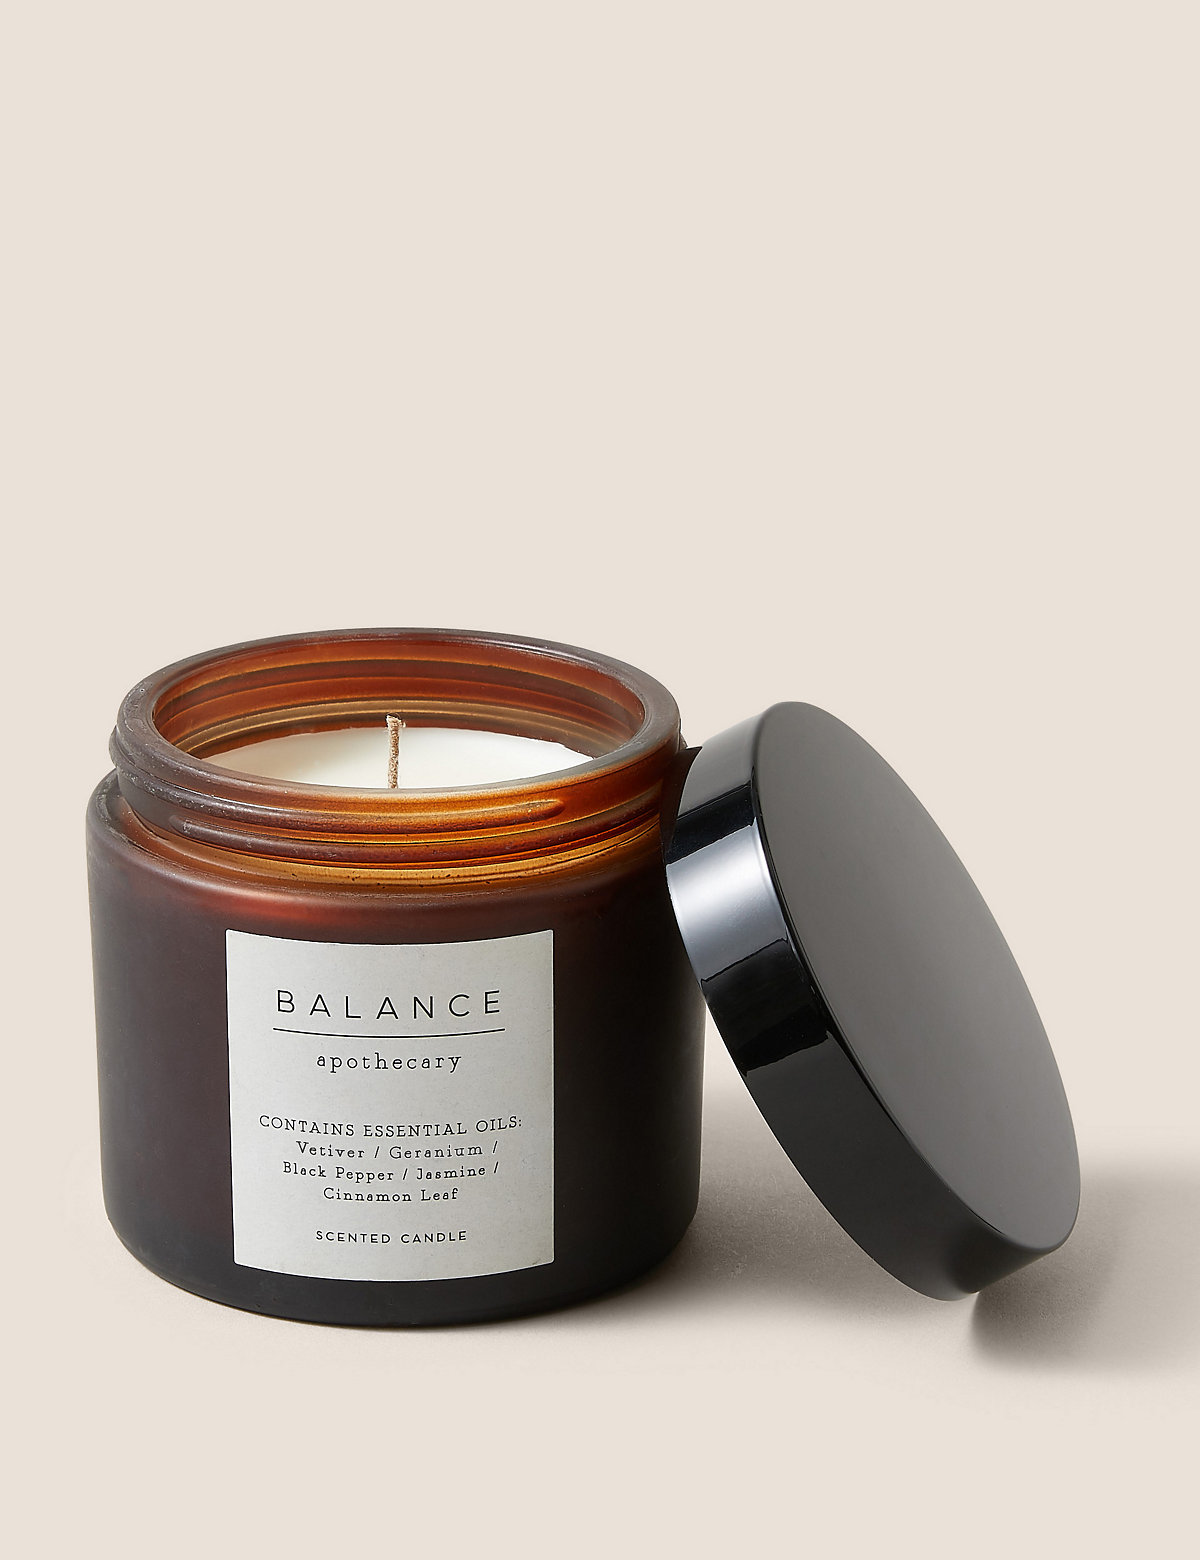 Balance Scented Candle